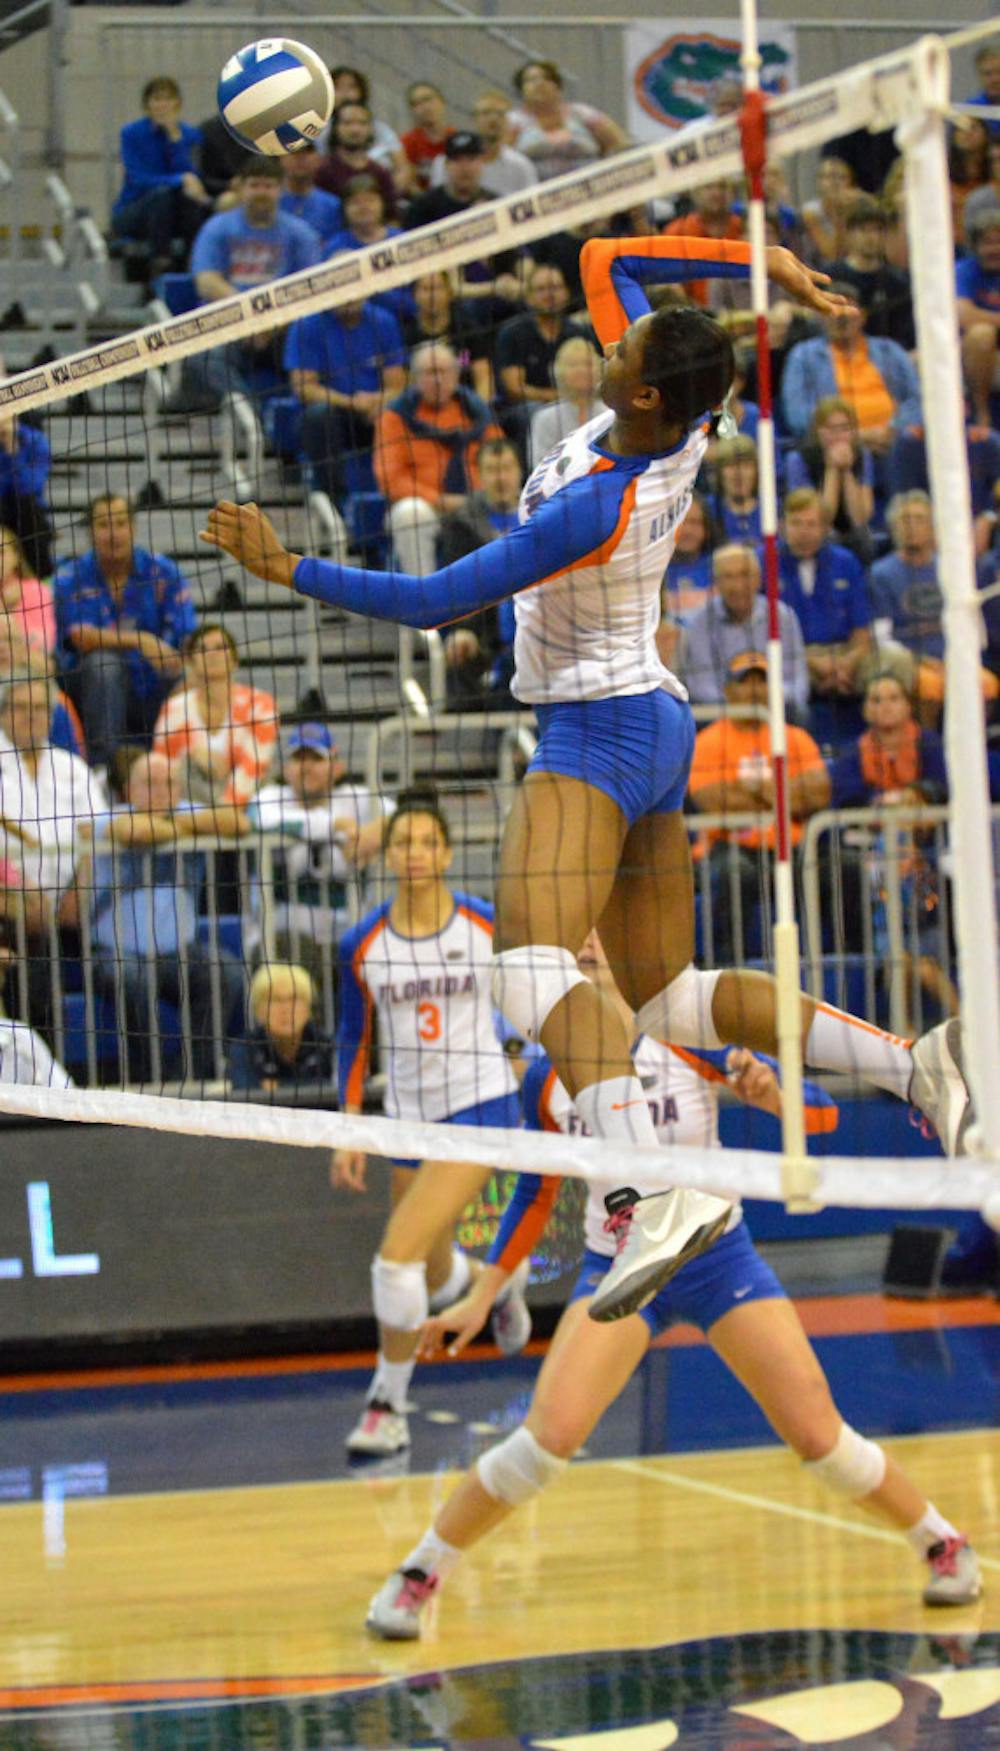 <p>Rhamat Alhassan swings for a kill attempt during Florida's 3-0 win against Alabama State in the first round of the NCAA Tournament on Dec. 5 in the O'Connell Center.</p>